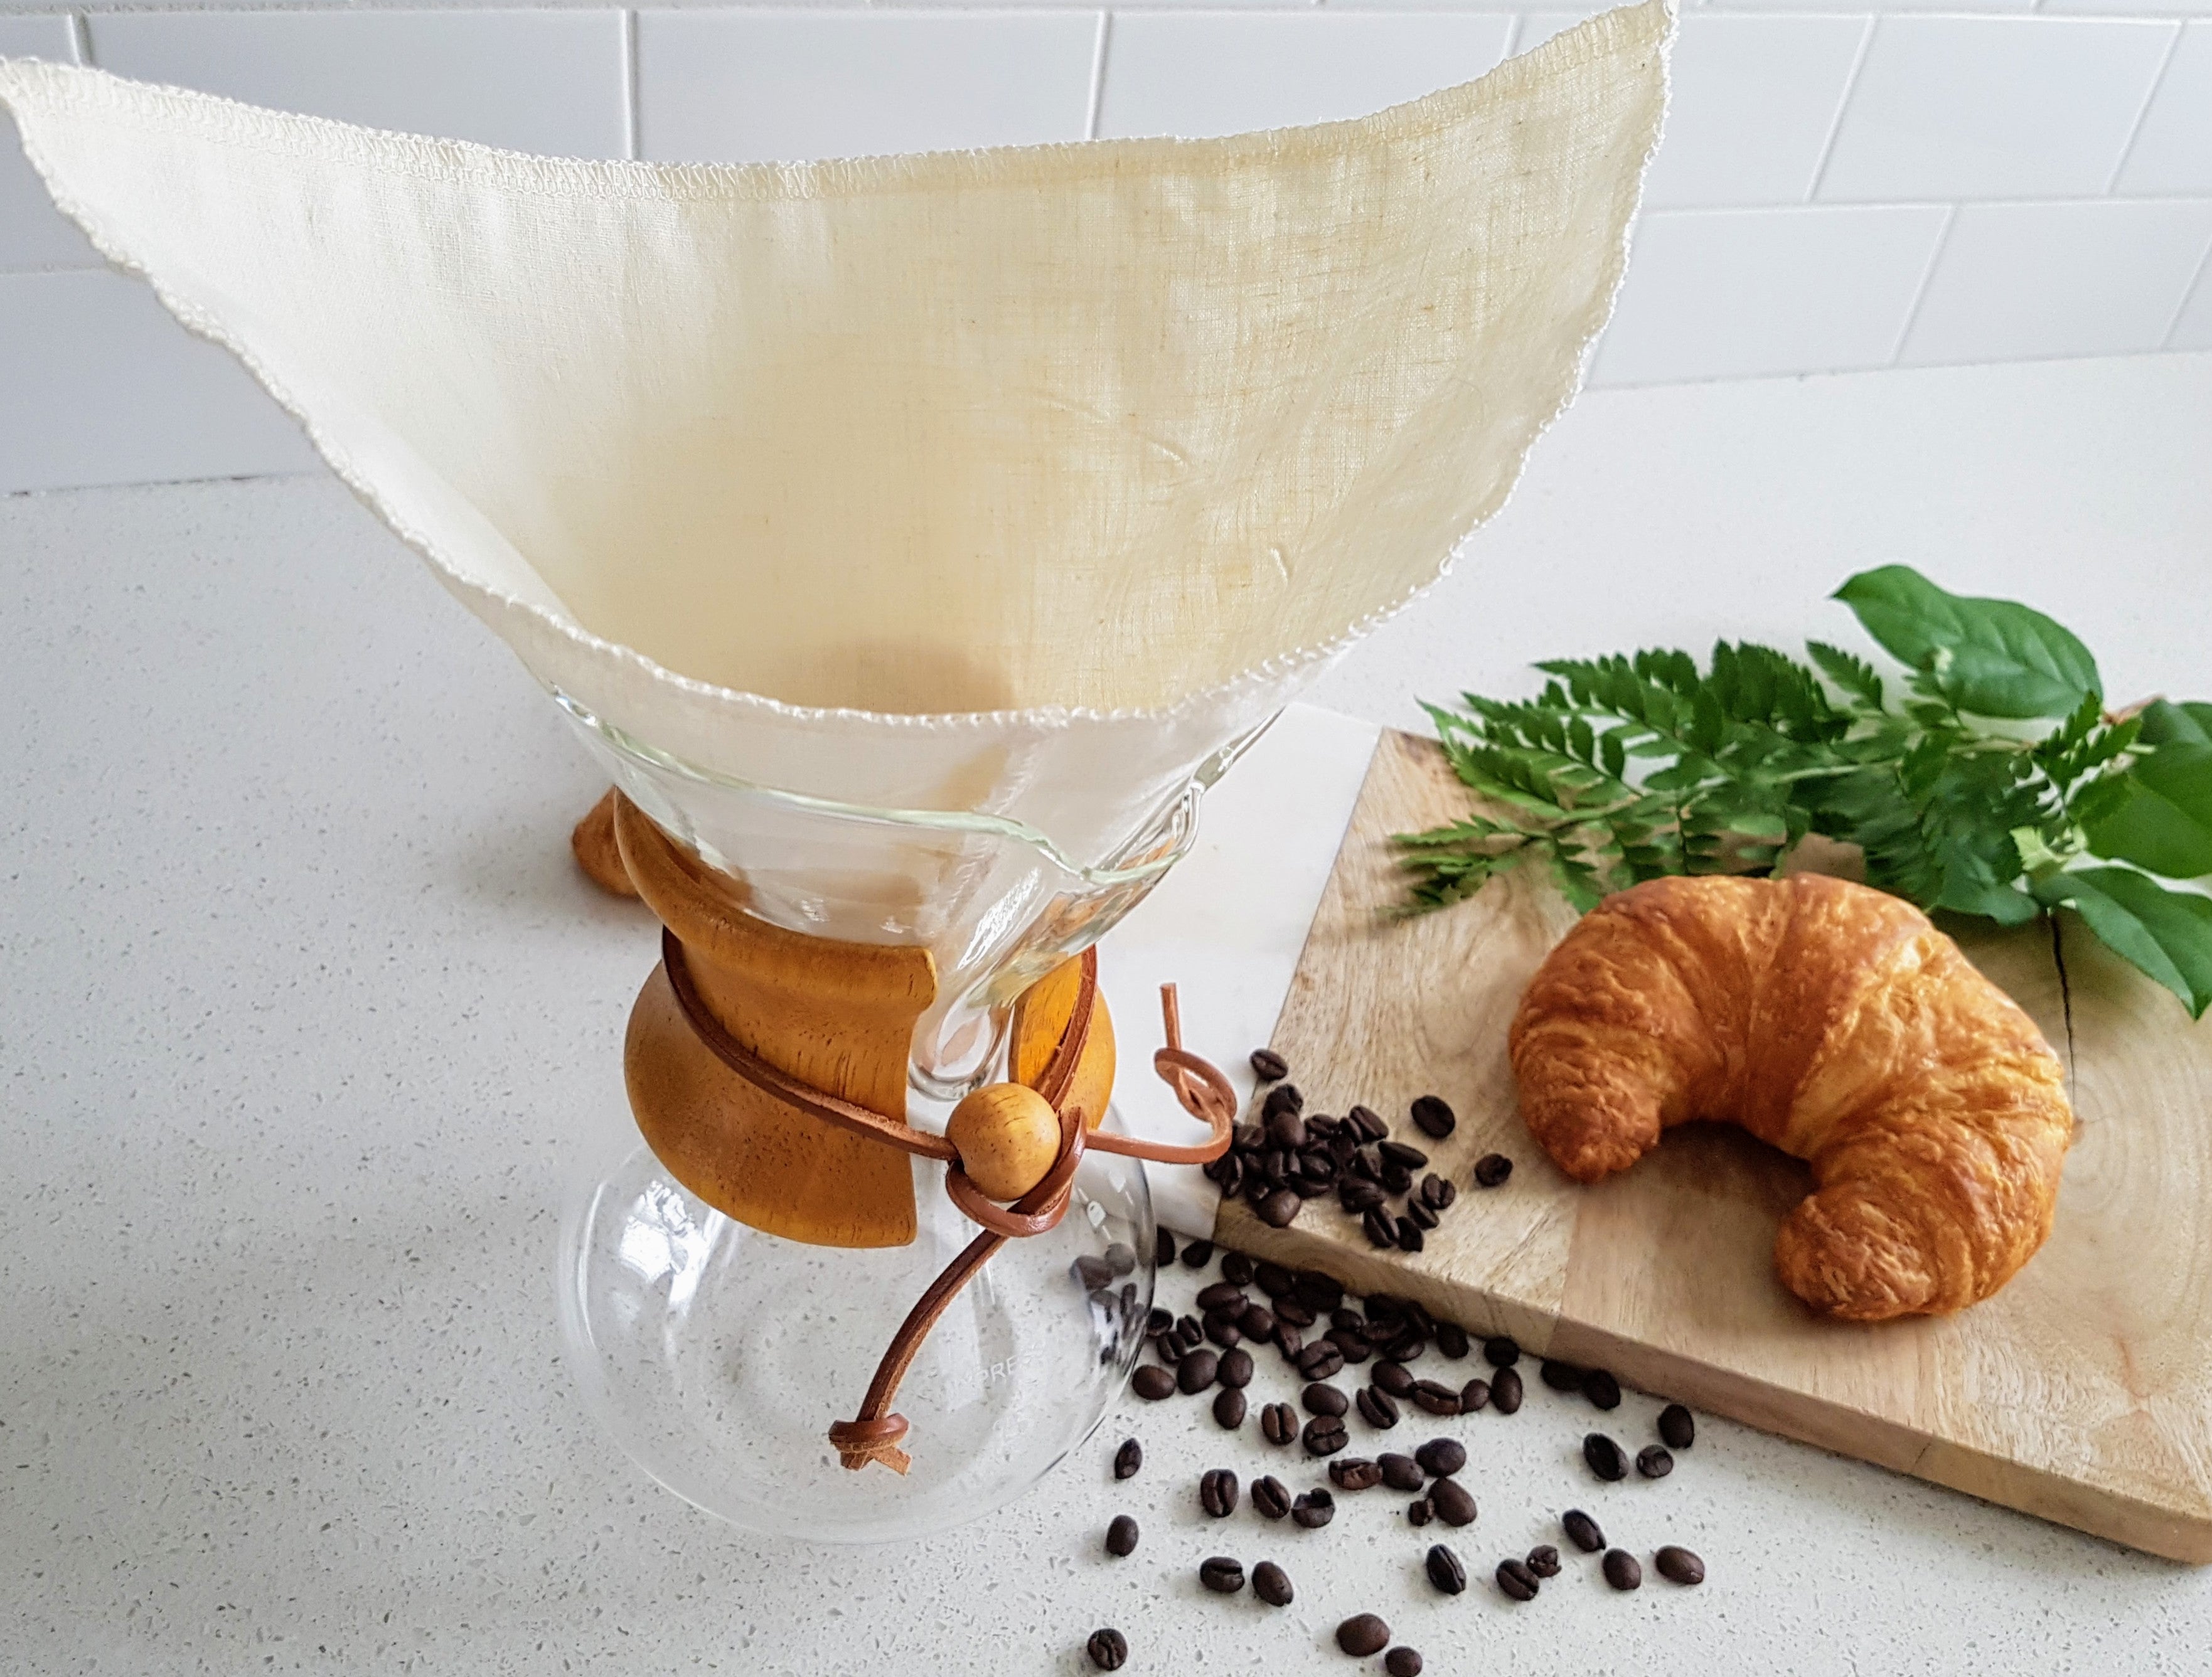 Pour-Over Style Cloth Coffee Filter